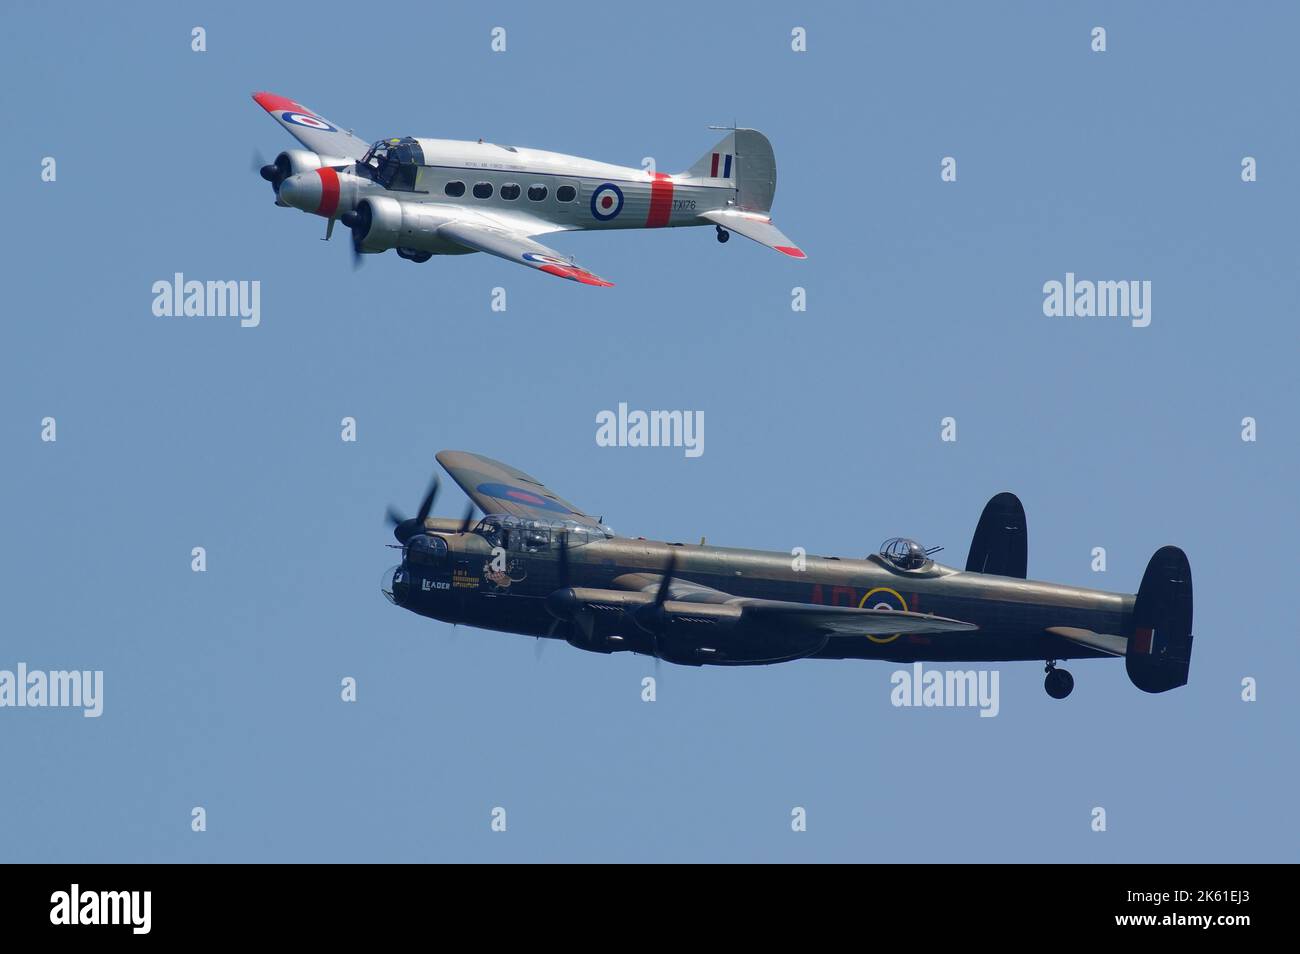 Avro Lancaster PA474 and Avro C19 G-AHKX, in formation at Old Warden, Biggleswade, Bedfordshire, England, United Kingdom, Stock Photo